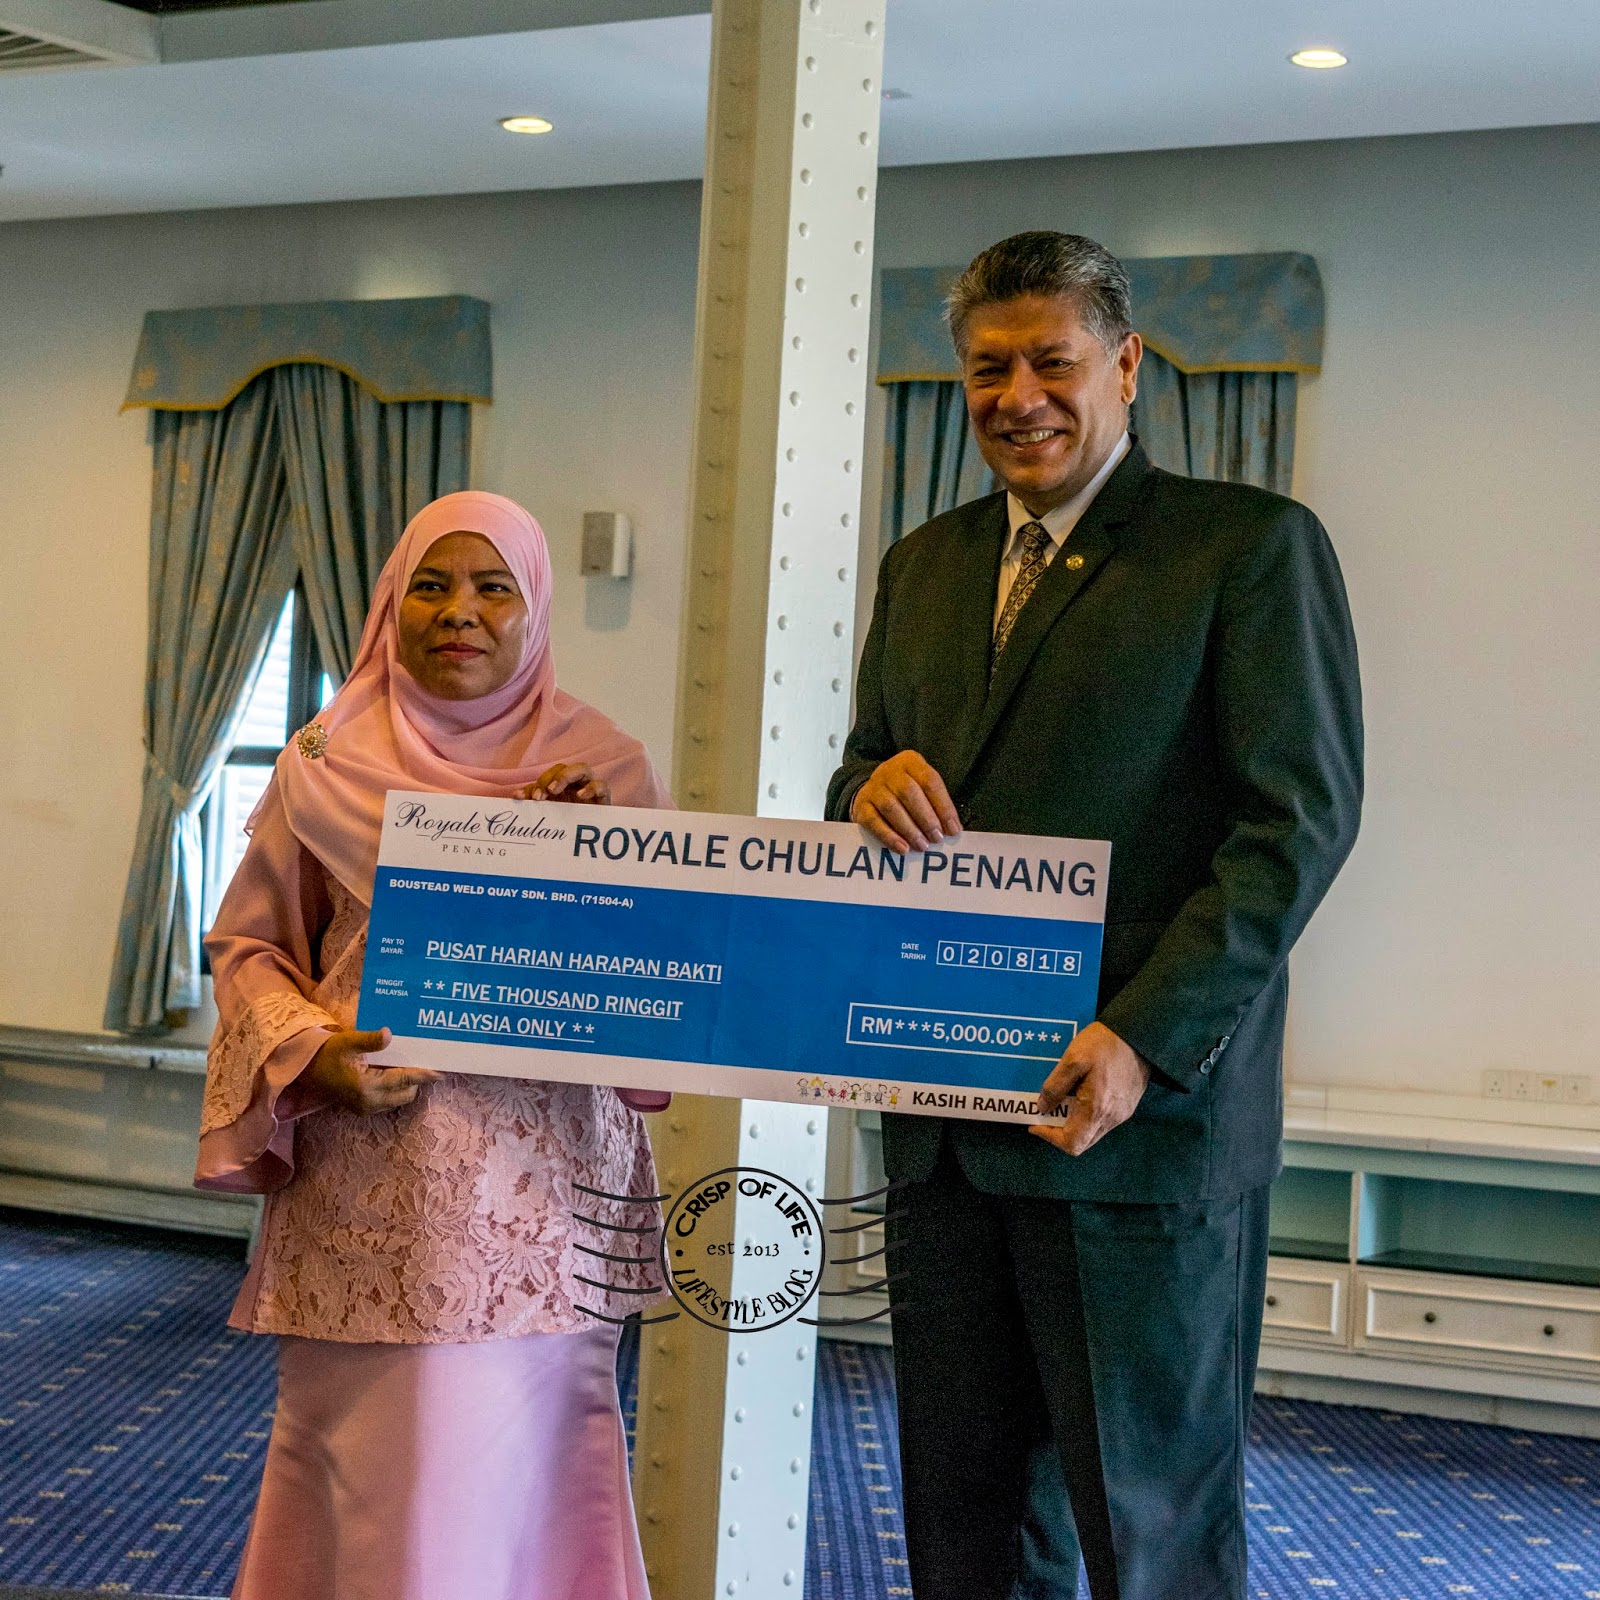 Royale Chulan Penang Collects RM 10,000 in annual charity campaigns.